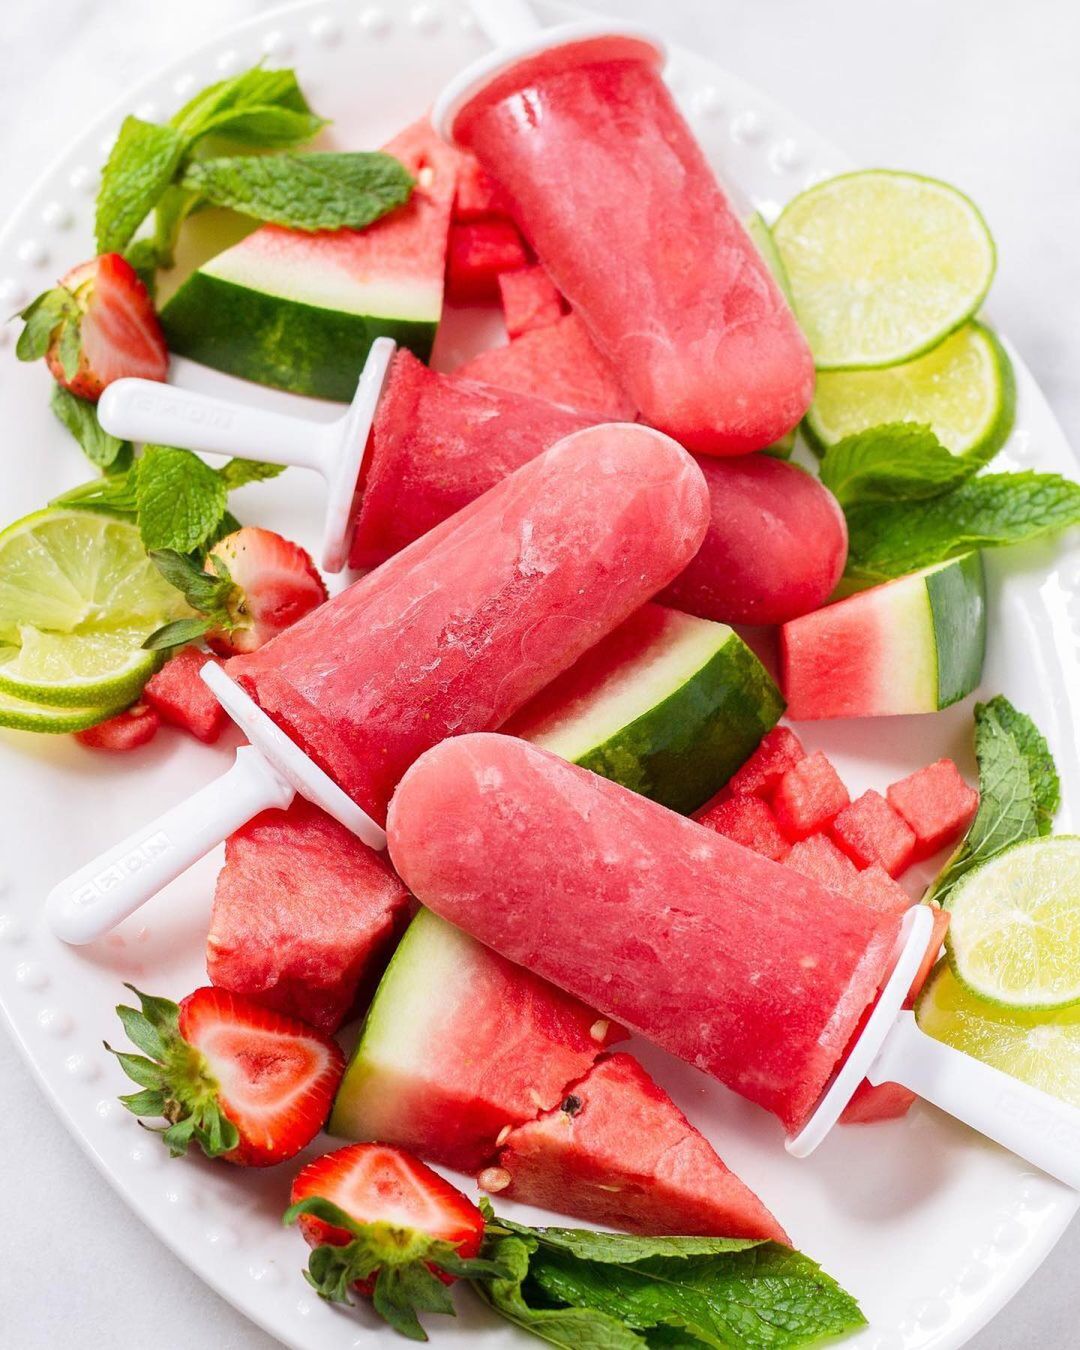 Amazing Benefits of Watermelon That Will Make It Top of Your Grocery List ...